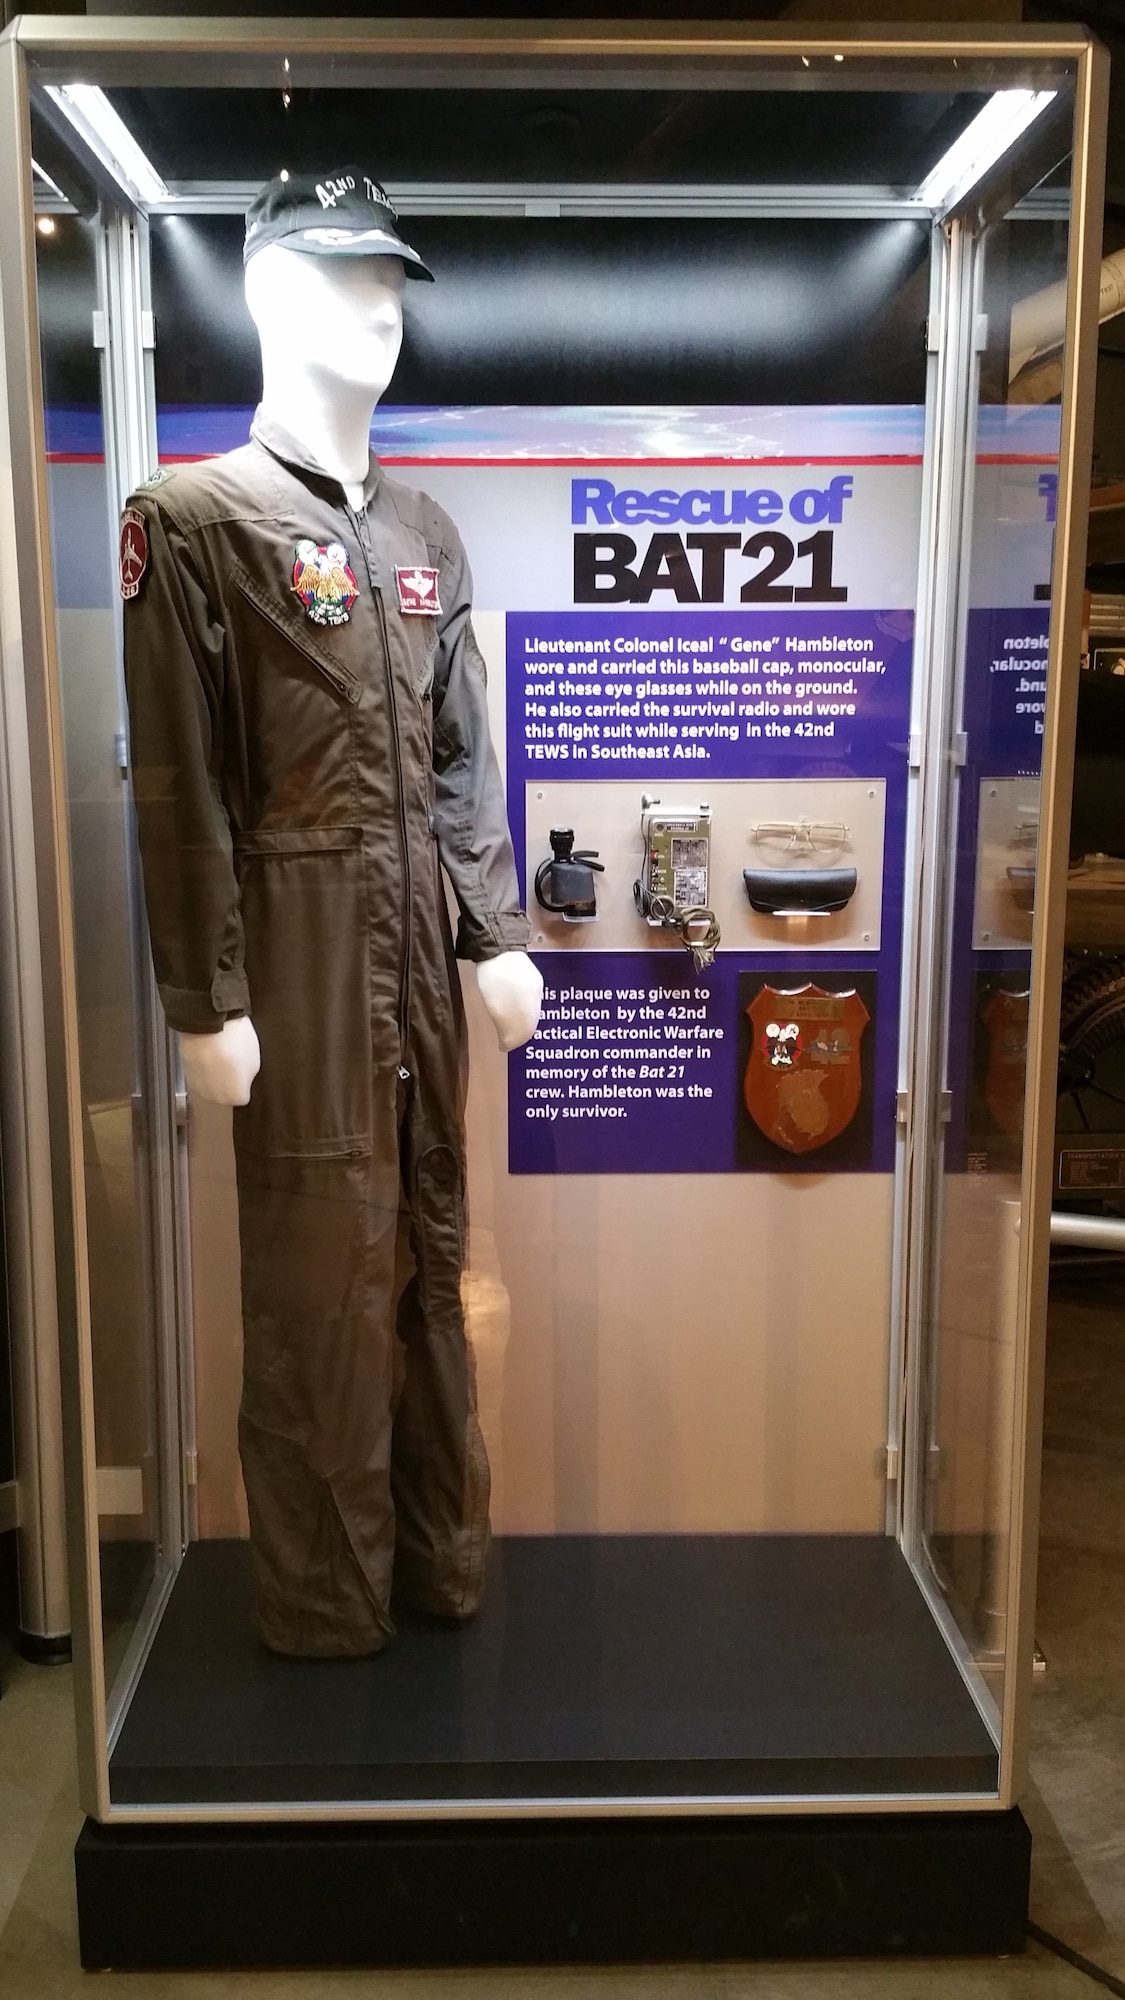 Displayed on this mannequin are the baseball cap, monocular and glasses that Lt. Col. Iceal "Gene" Hambleton had with him when rescued. He also carried the survival radio and wore this flight suit while serving in the 42nd TEWS in Southeast Asia. (U.S. Air Force photo)
